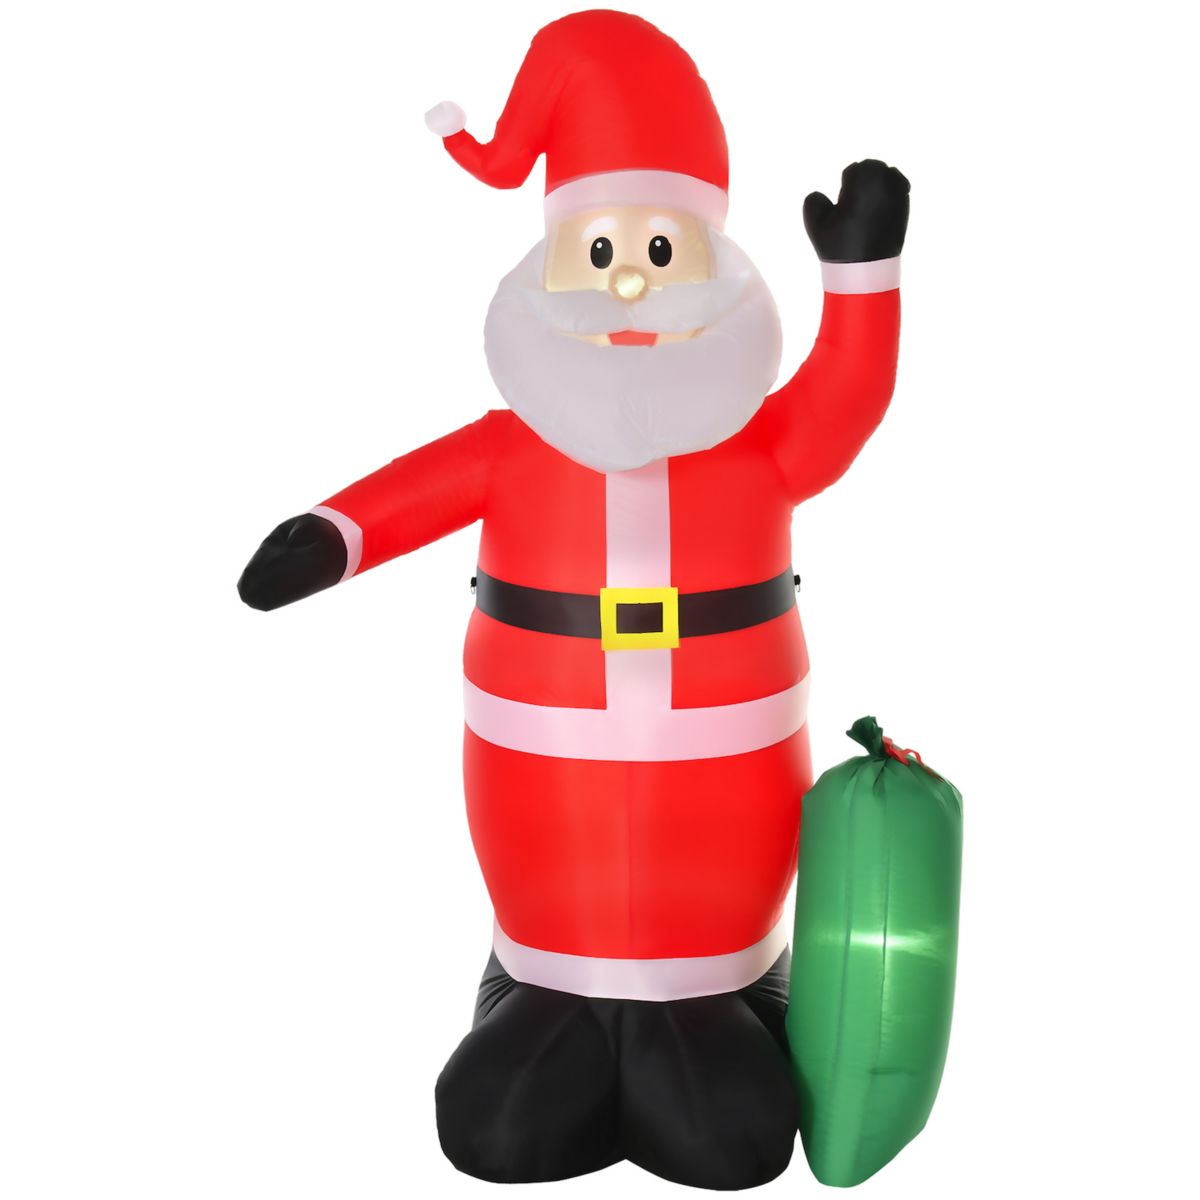 HOMCOM 8ft Christmas Inflatable Santa Claus with Toy Bag Outdoor Blow Up Yard Decoration with LED Lights Display HomCom